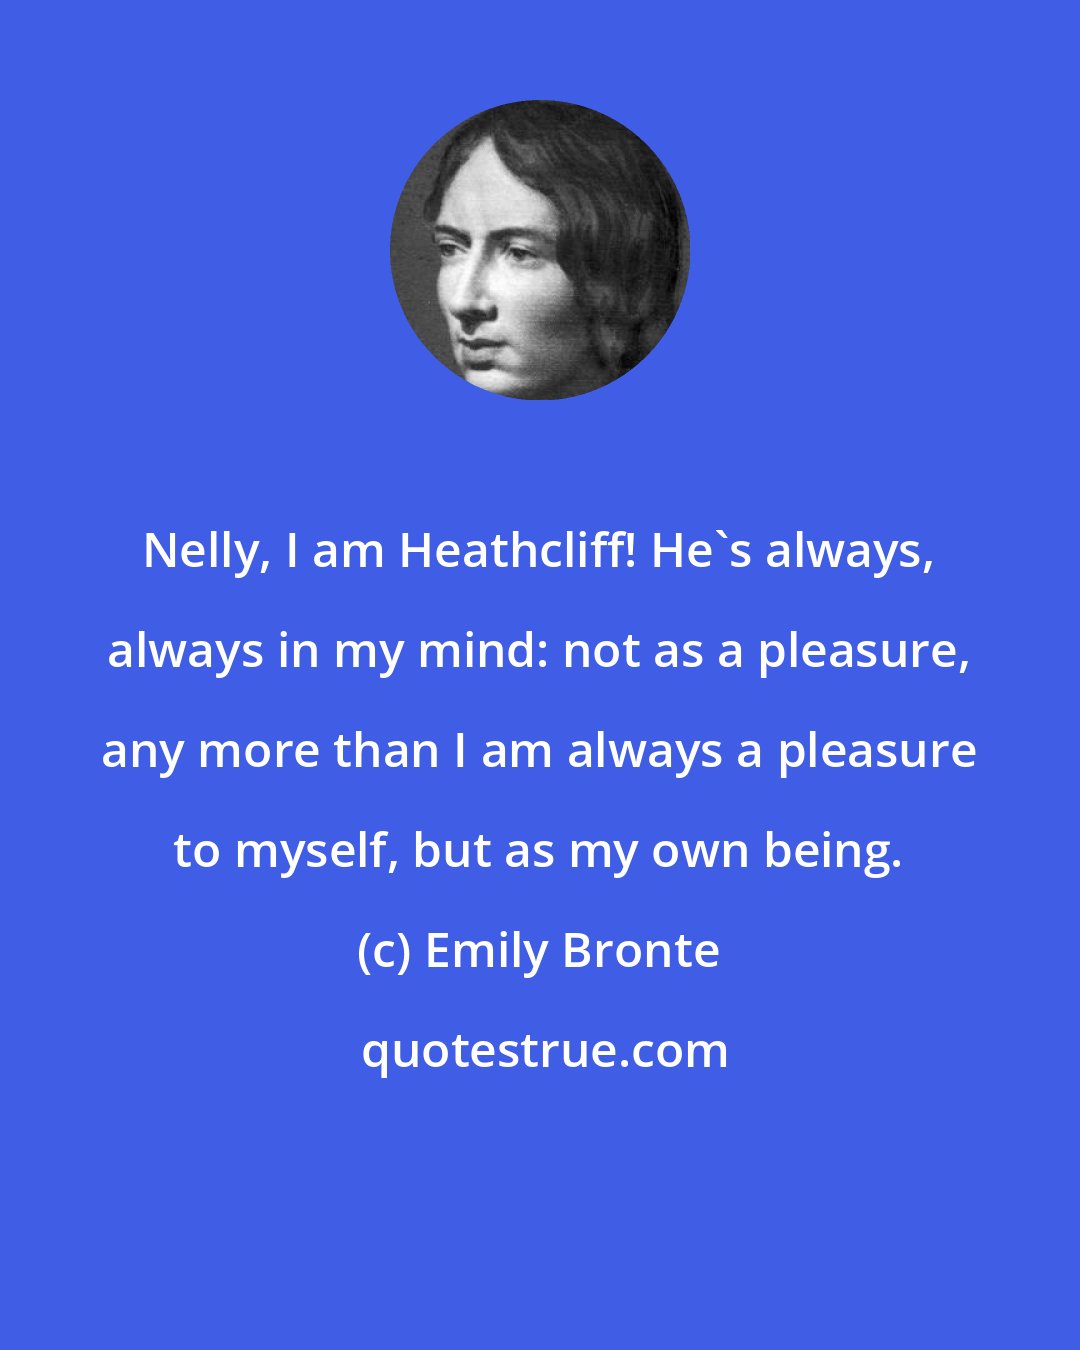 Emily Bronte: Nelly, I am Heathcliff! He's always, always in my mind: not as a pleasure, any more than I am always a pleasure to myself, but as my own being.